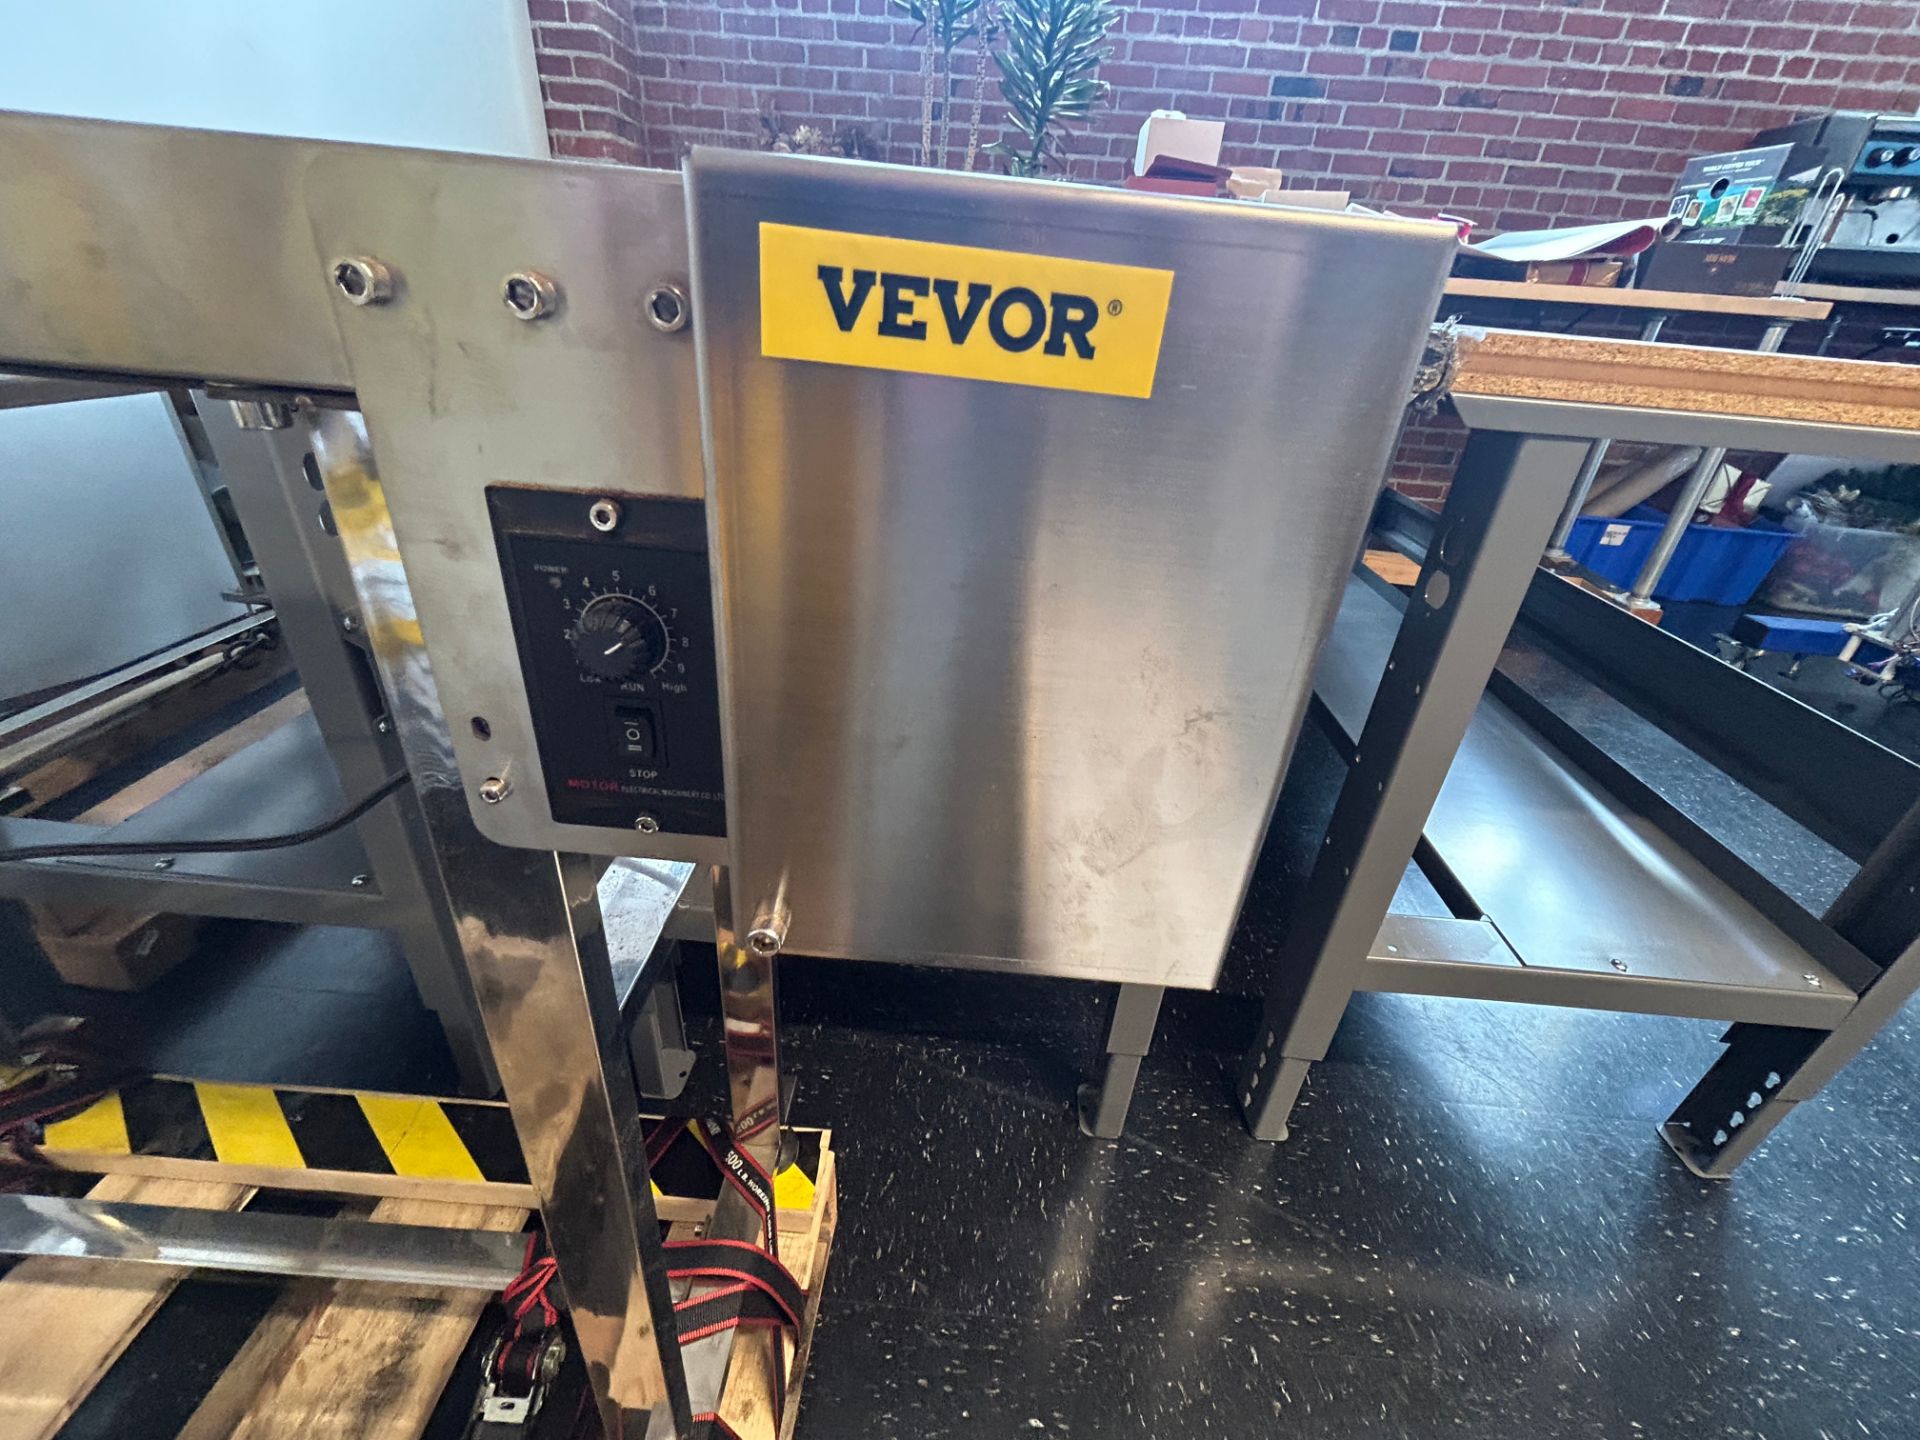 Vevor Mdl ITC Adjustable, 12 Inch Wide x 56 Inch Long Flat Belt Conveyor With Variable Speed - Image 3 of 4